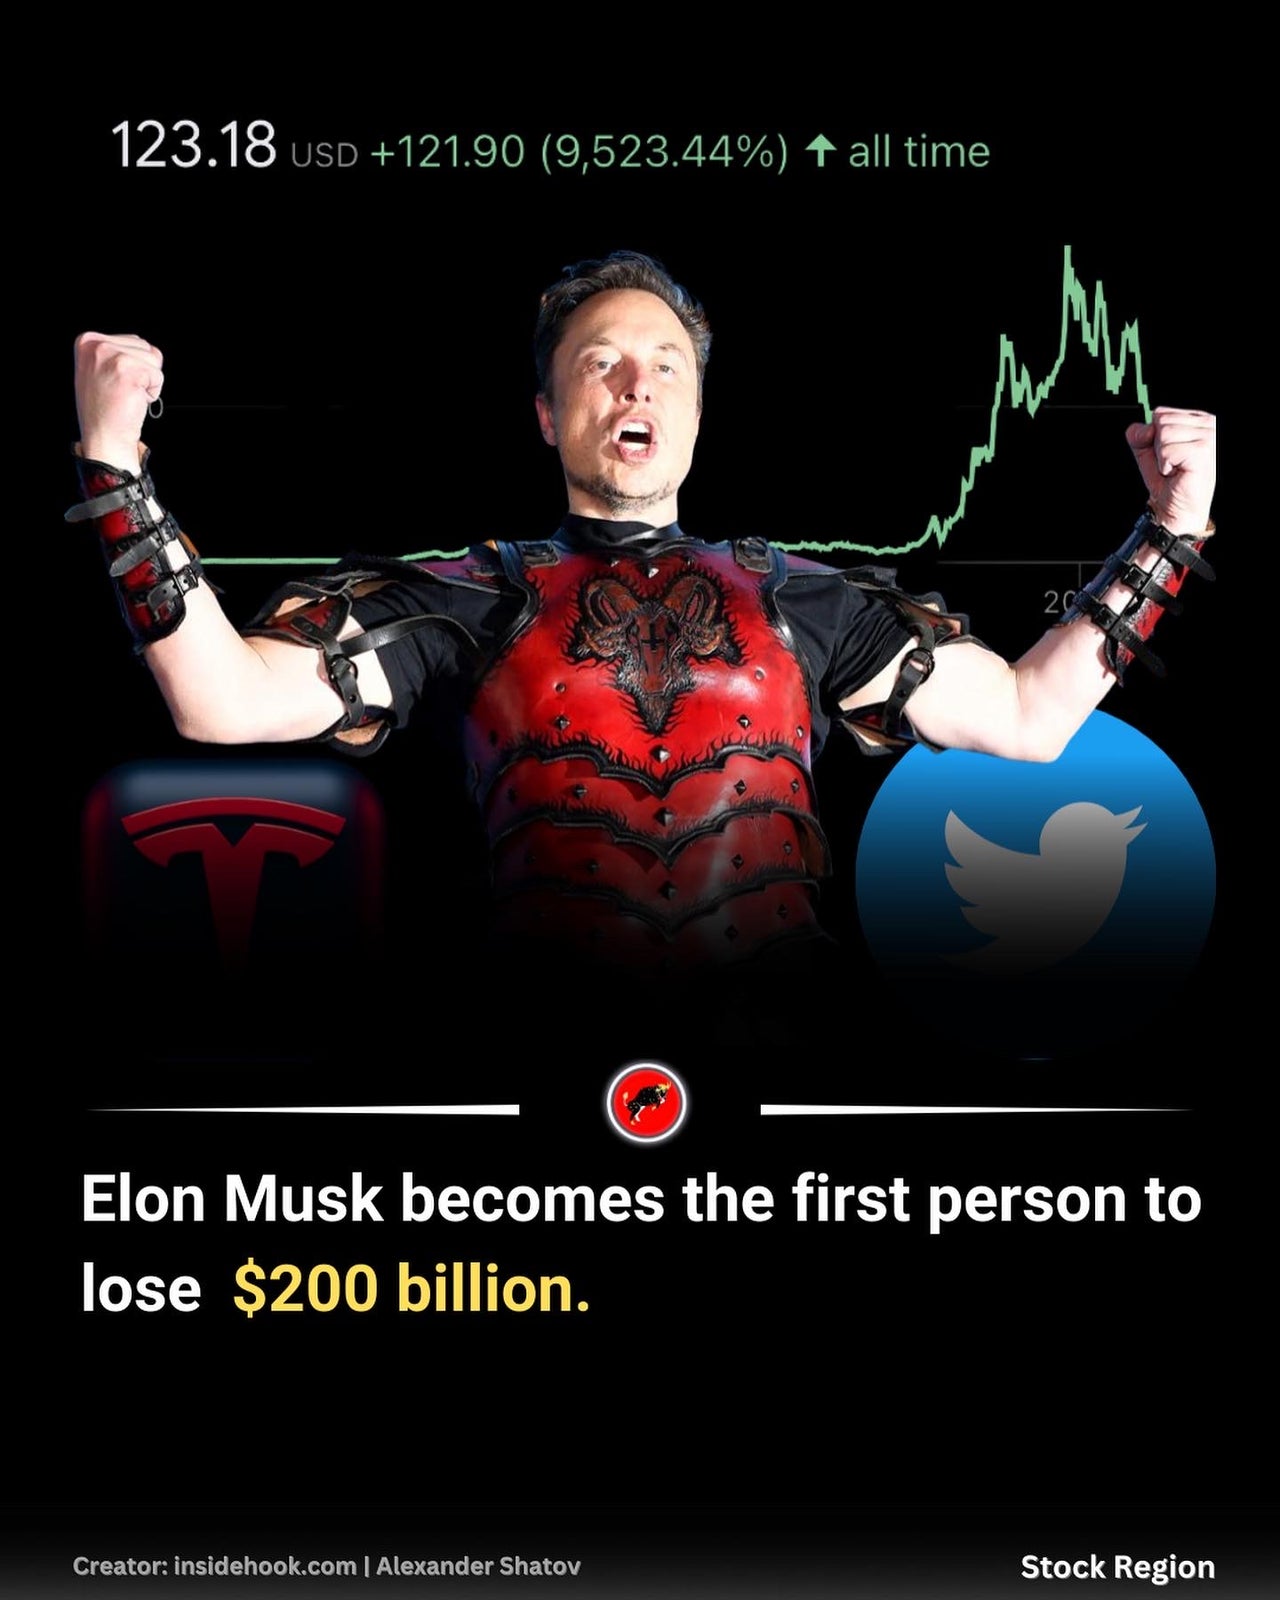 Elon Musk becomes the first person to lose $200 billion